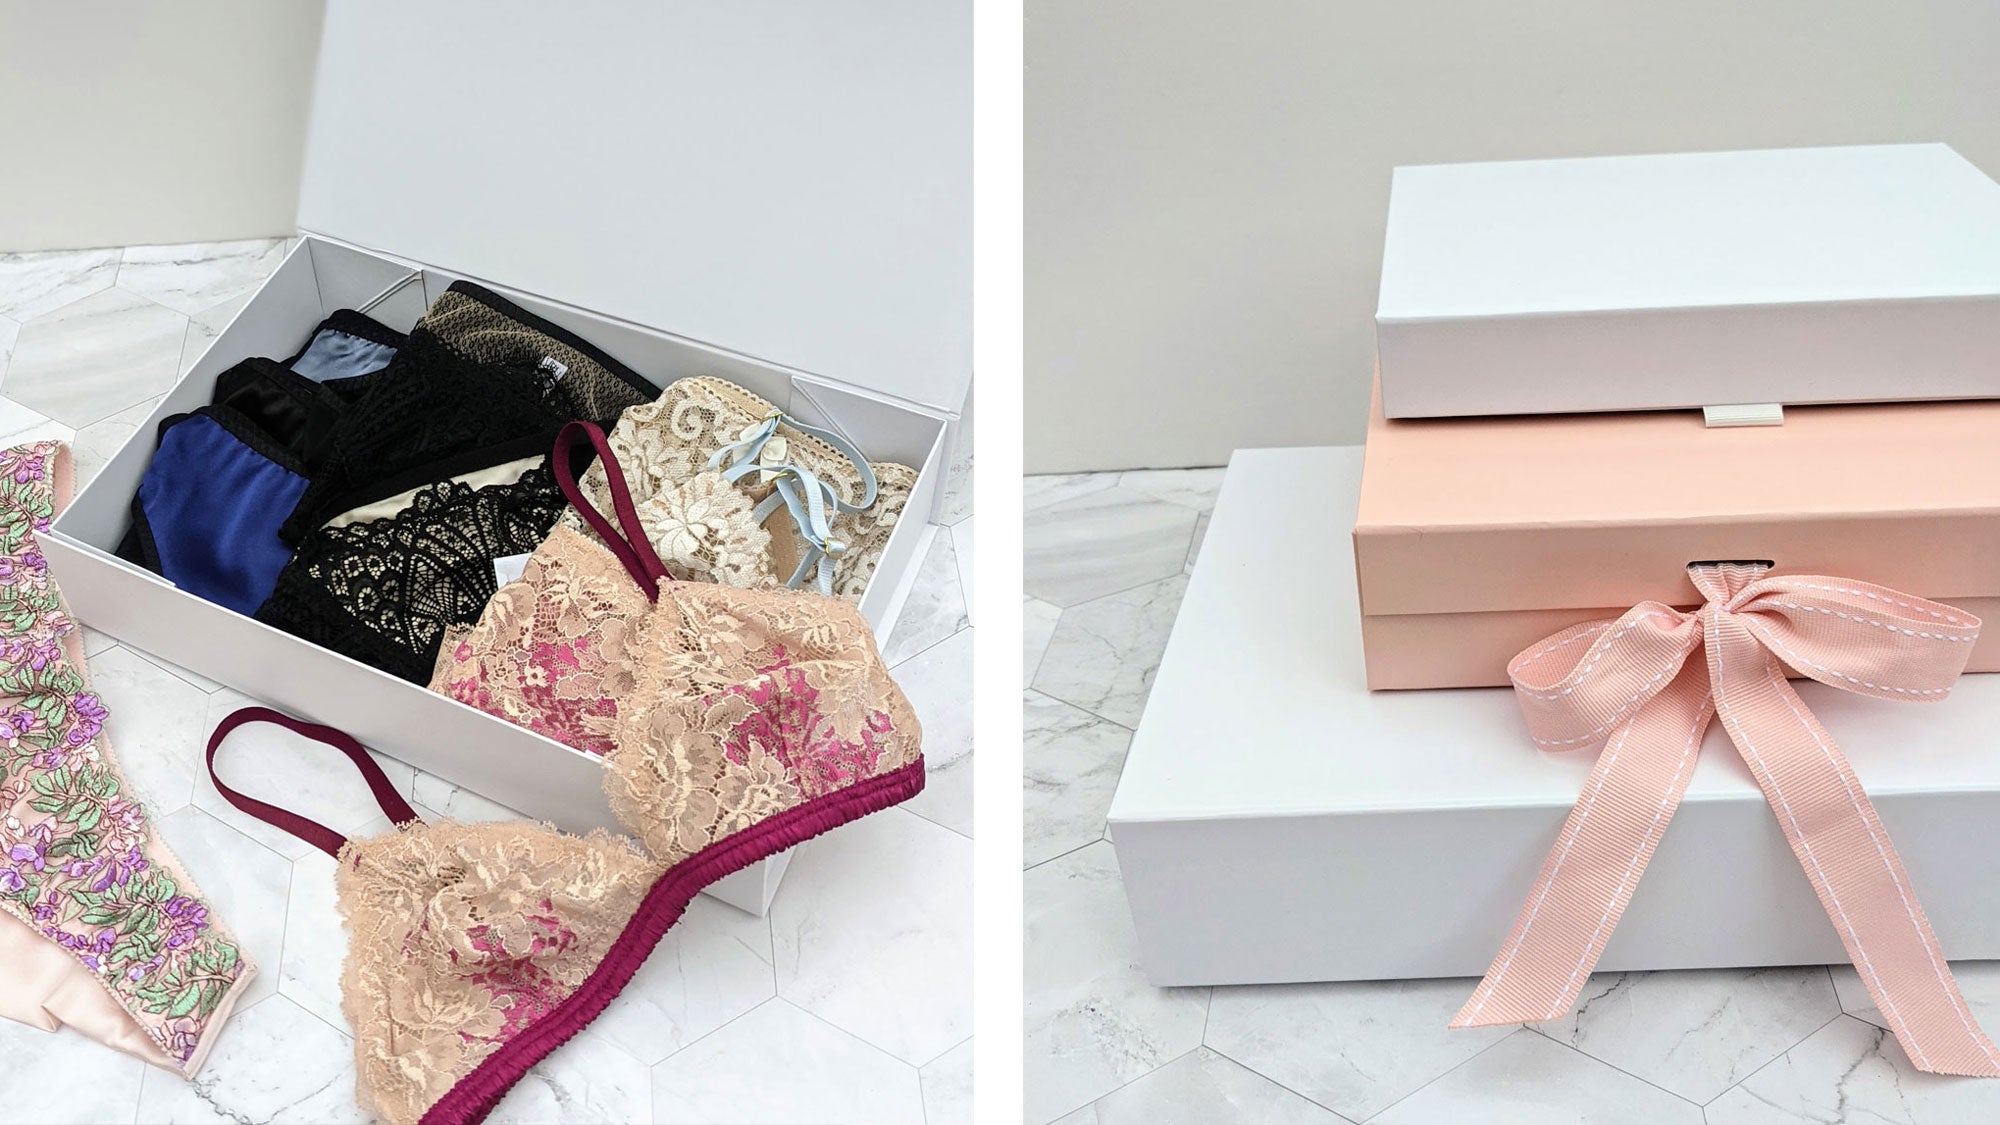 Lingerie gift guide and how to shop for underwear presents